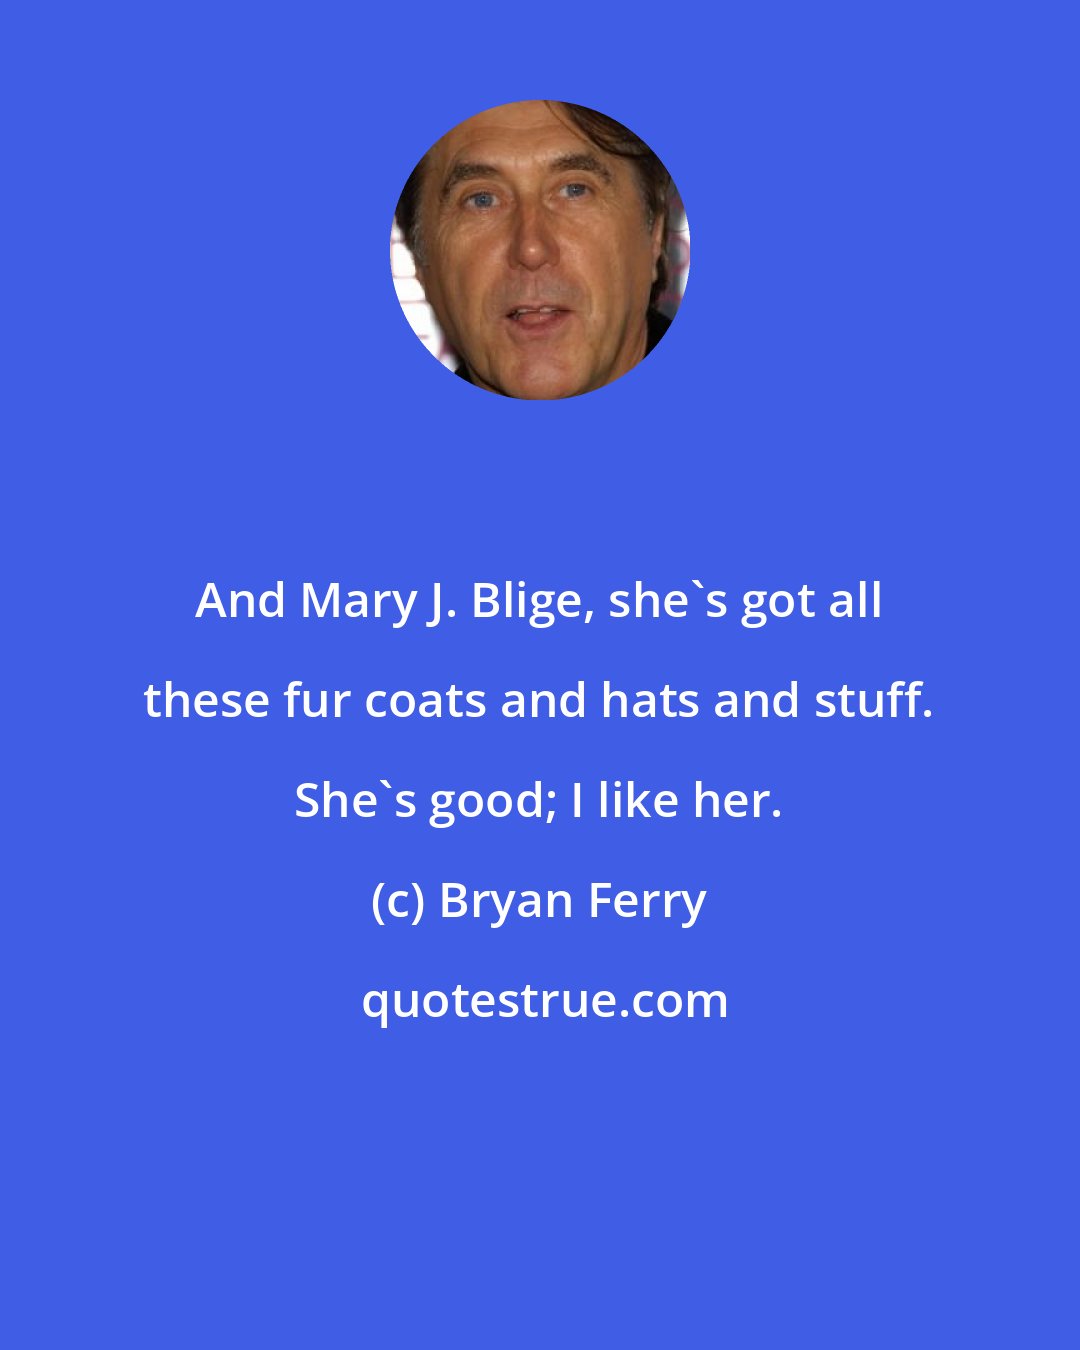 Bryan Ferry: And Mary J. Blige, she's got all these fur coats and hats and stuff. She's good; I like her.